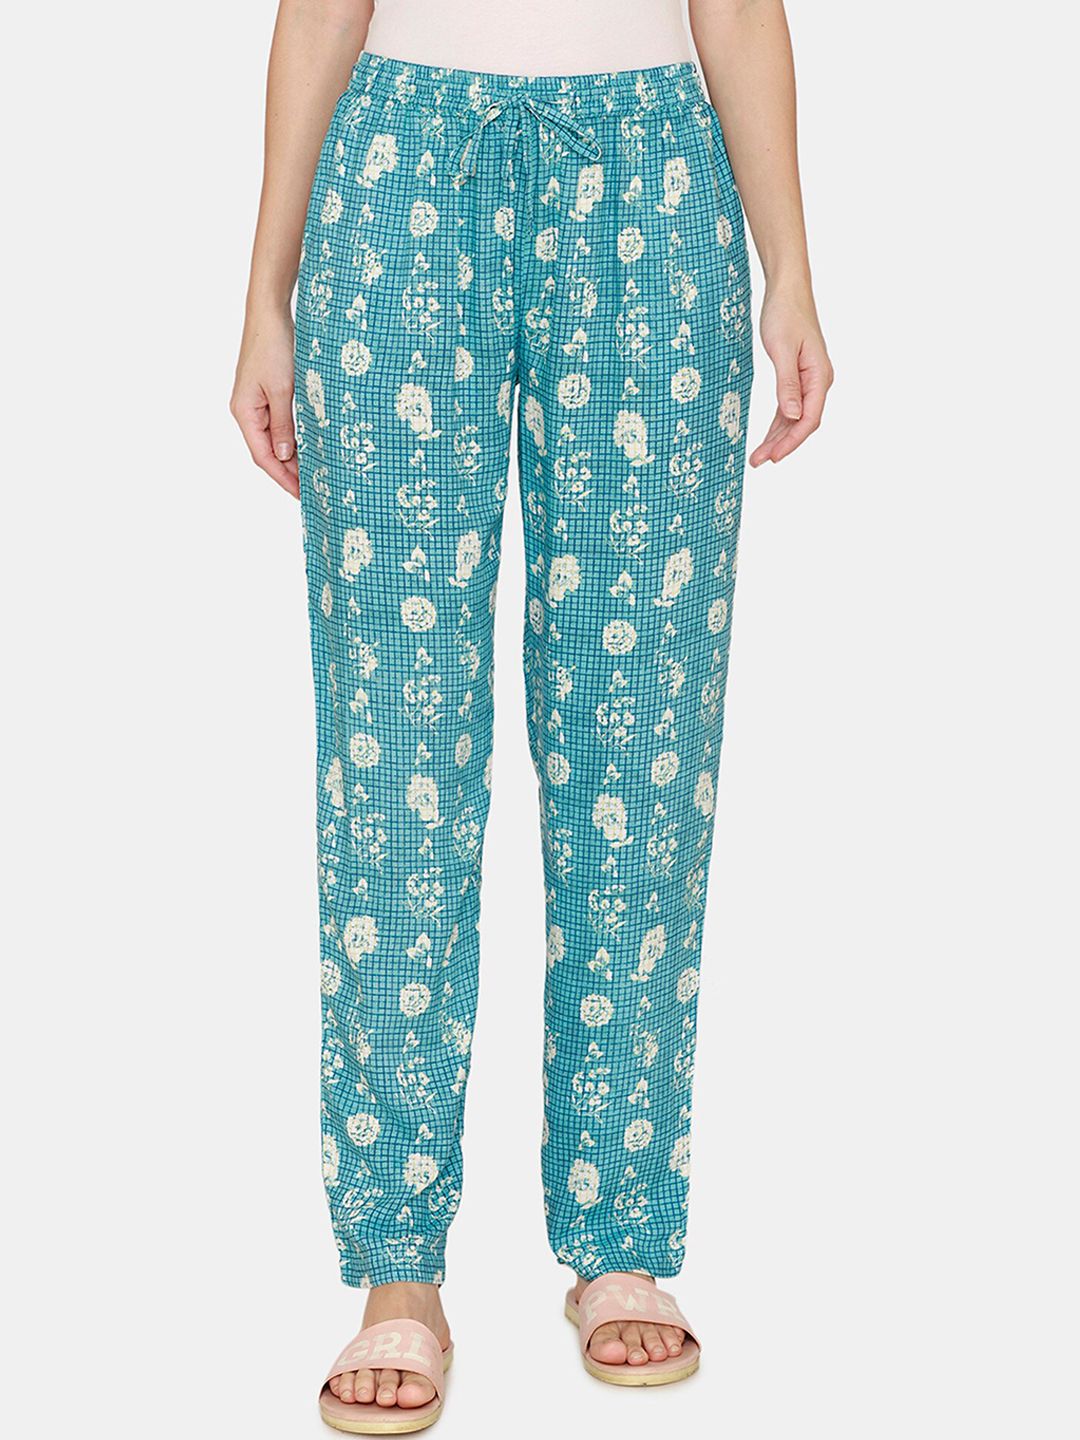 Coucou by Zivame Women Turquoise Blue Printed Cotton Pyjama Price in India